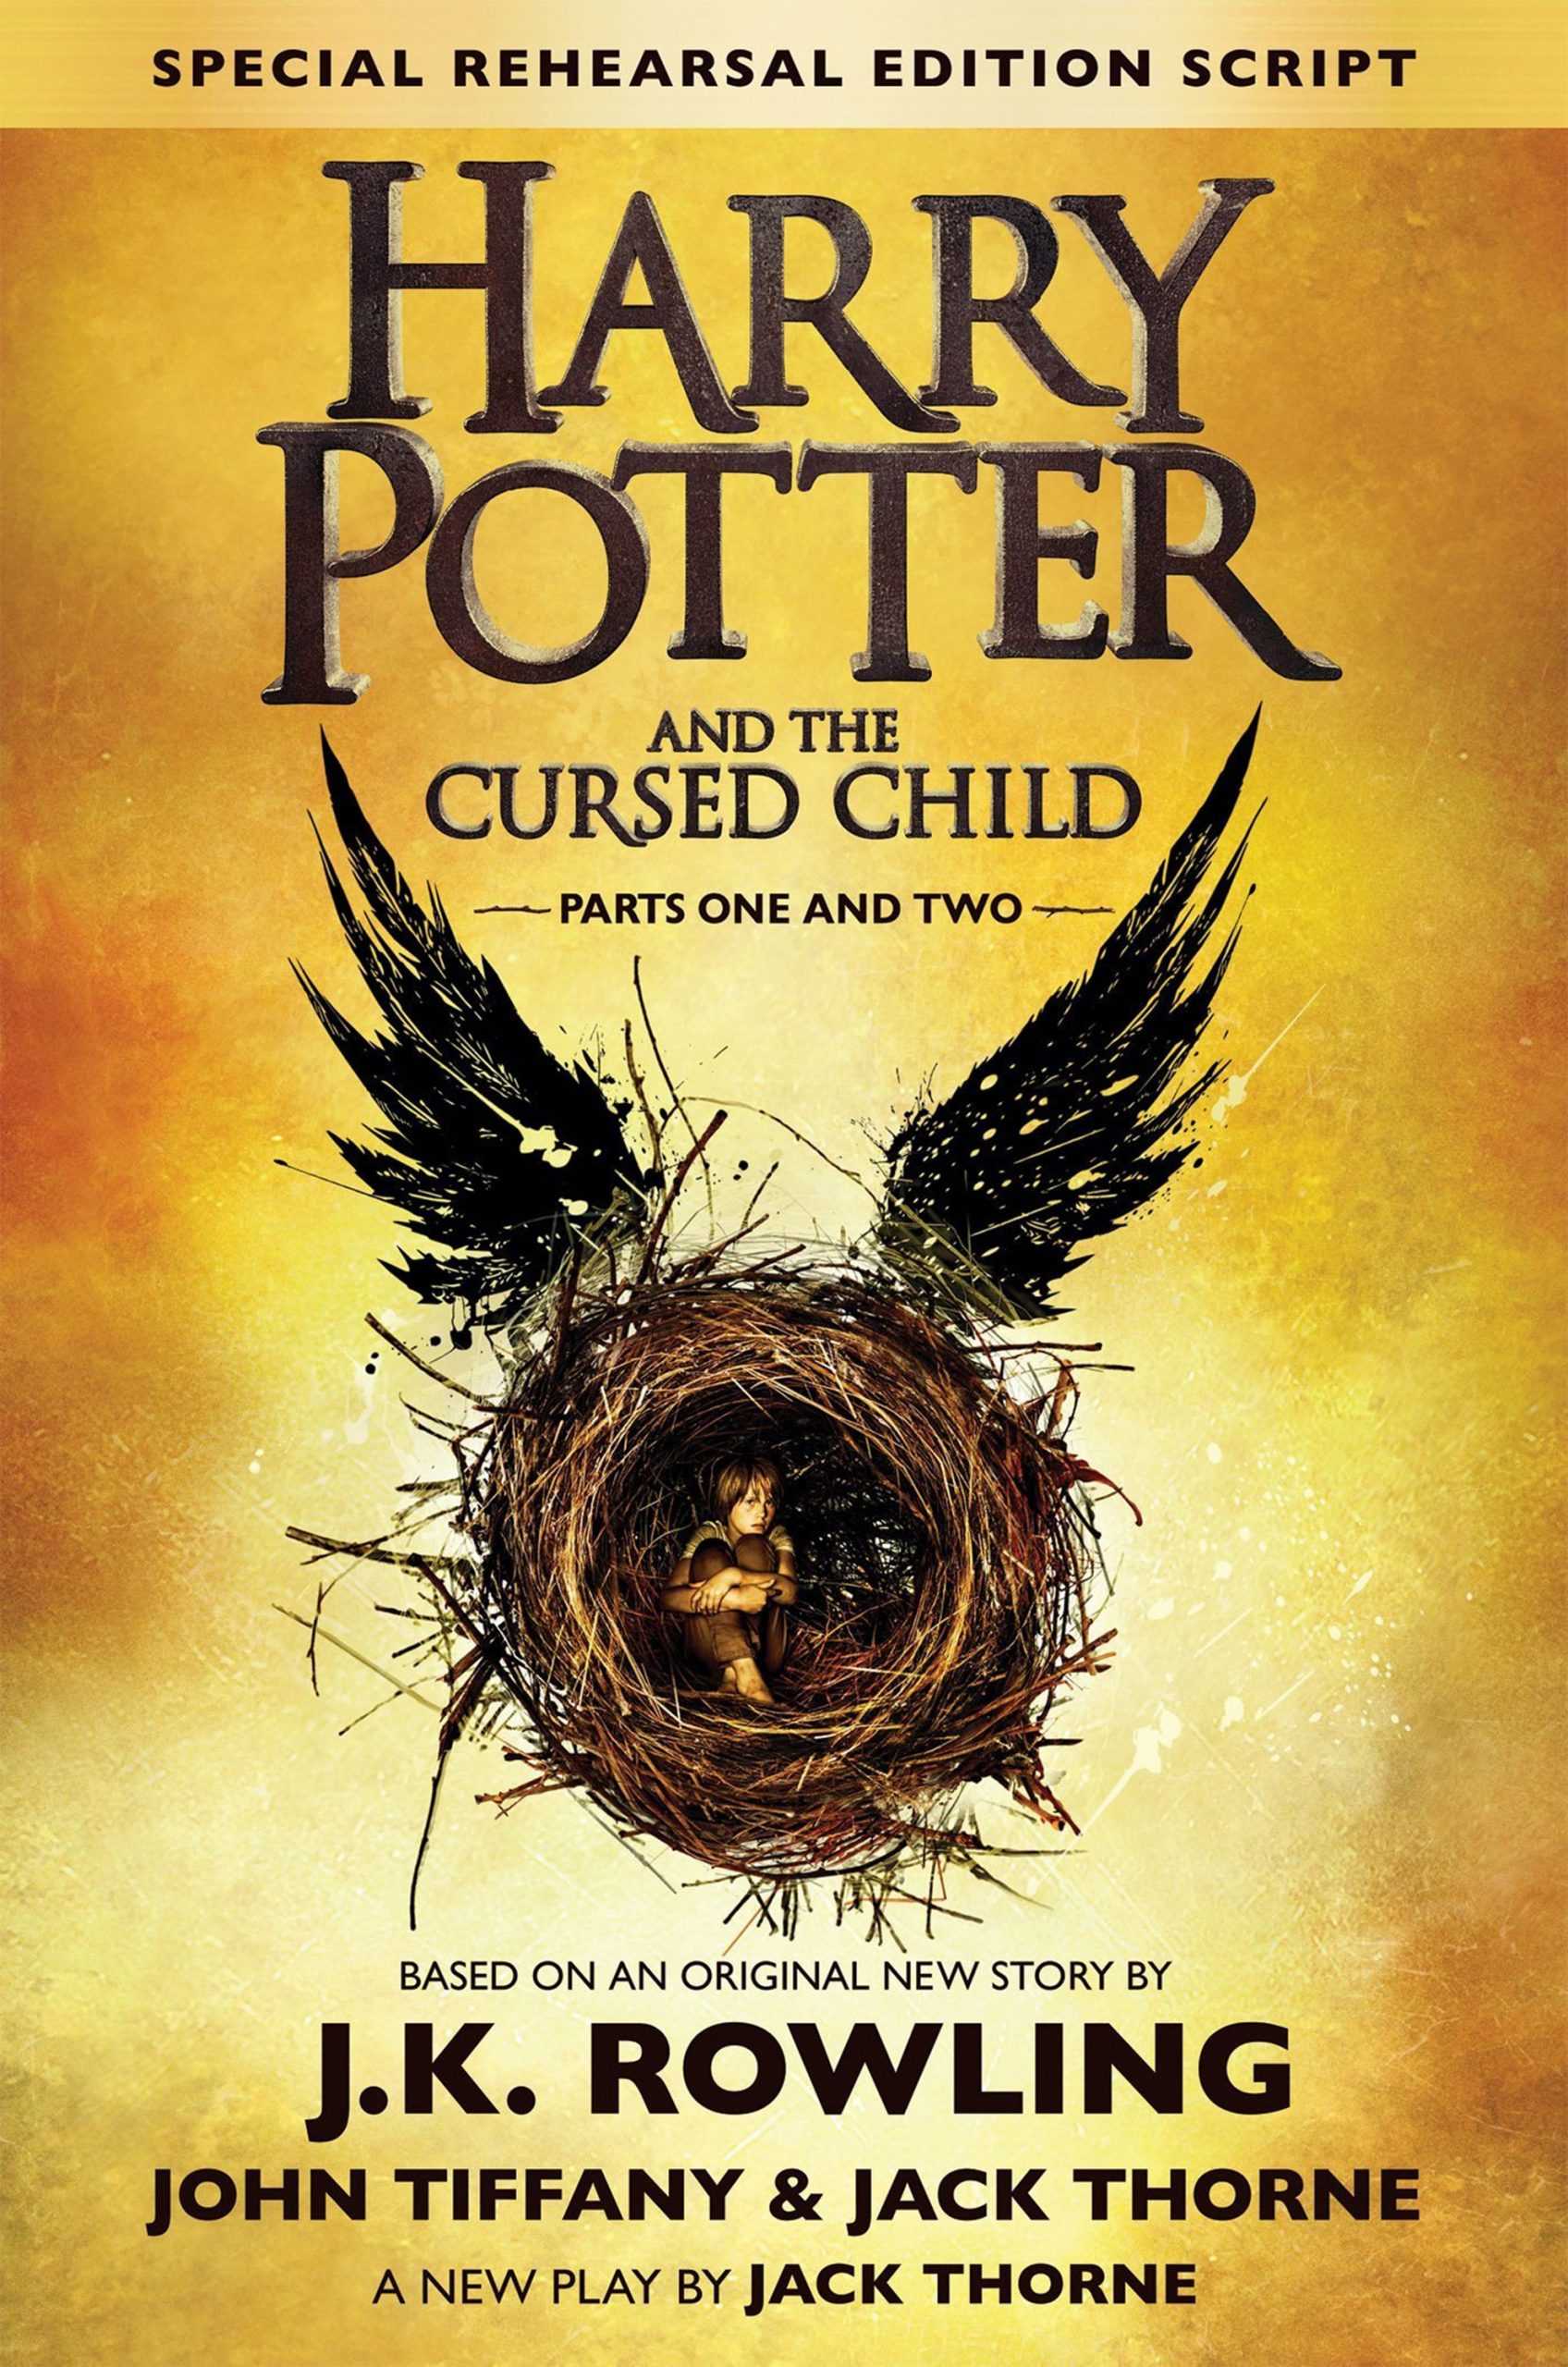 “Cursed Child” is missing the magic